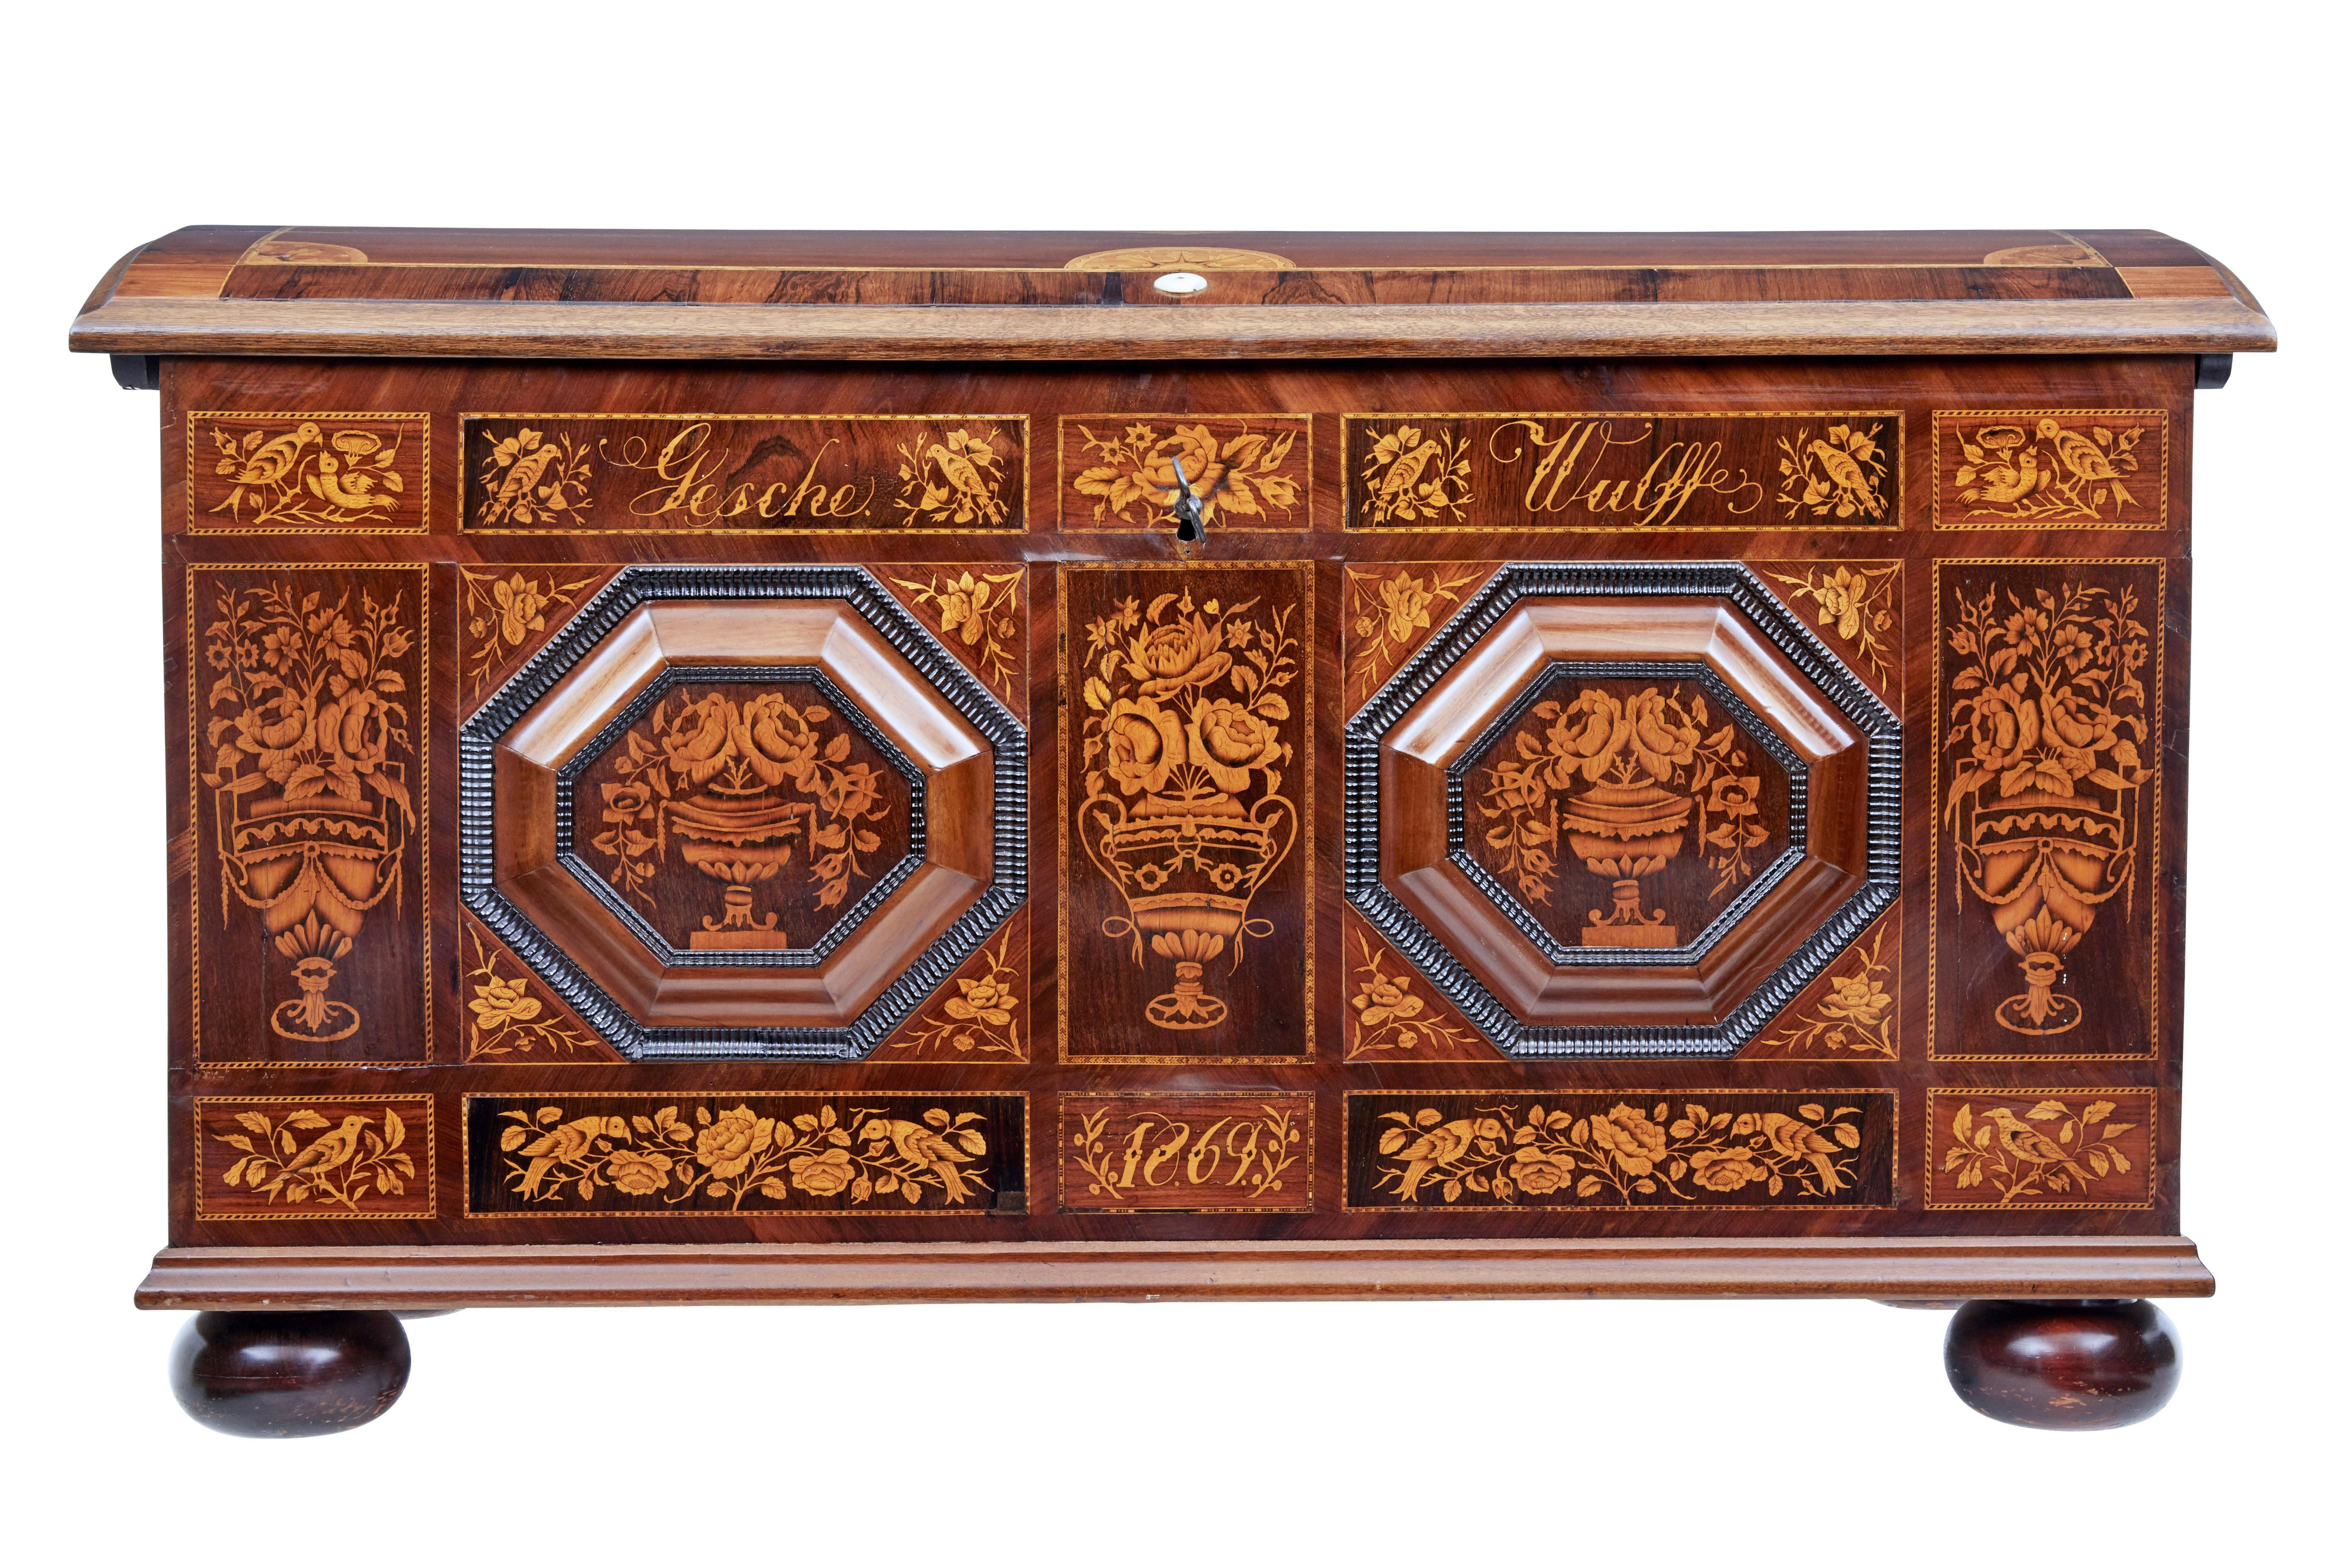 Beautiful inlaid dome top chest of the finest quality, circa 1869.

Inscribed on the front with the name 'gesche wulff' and dated 1869. Superbly inlaid in satinwood with urns, florals and birds. 2 octagonal raised plaques applied to the front,